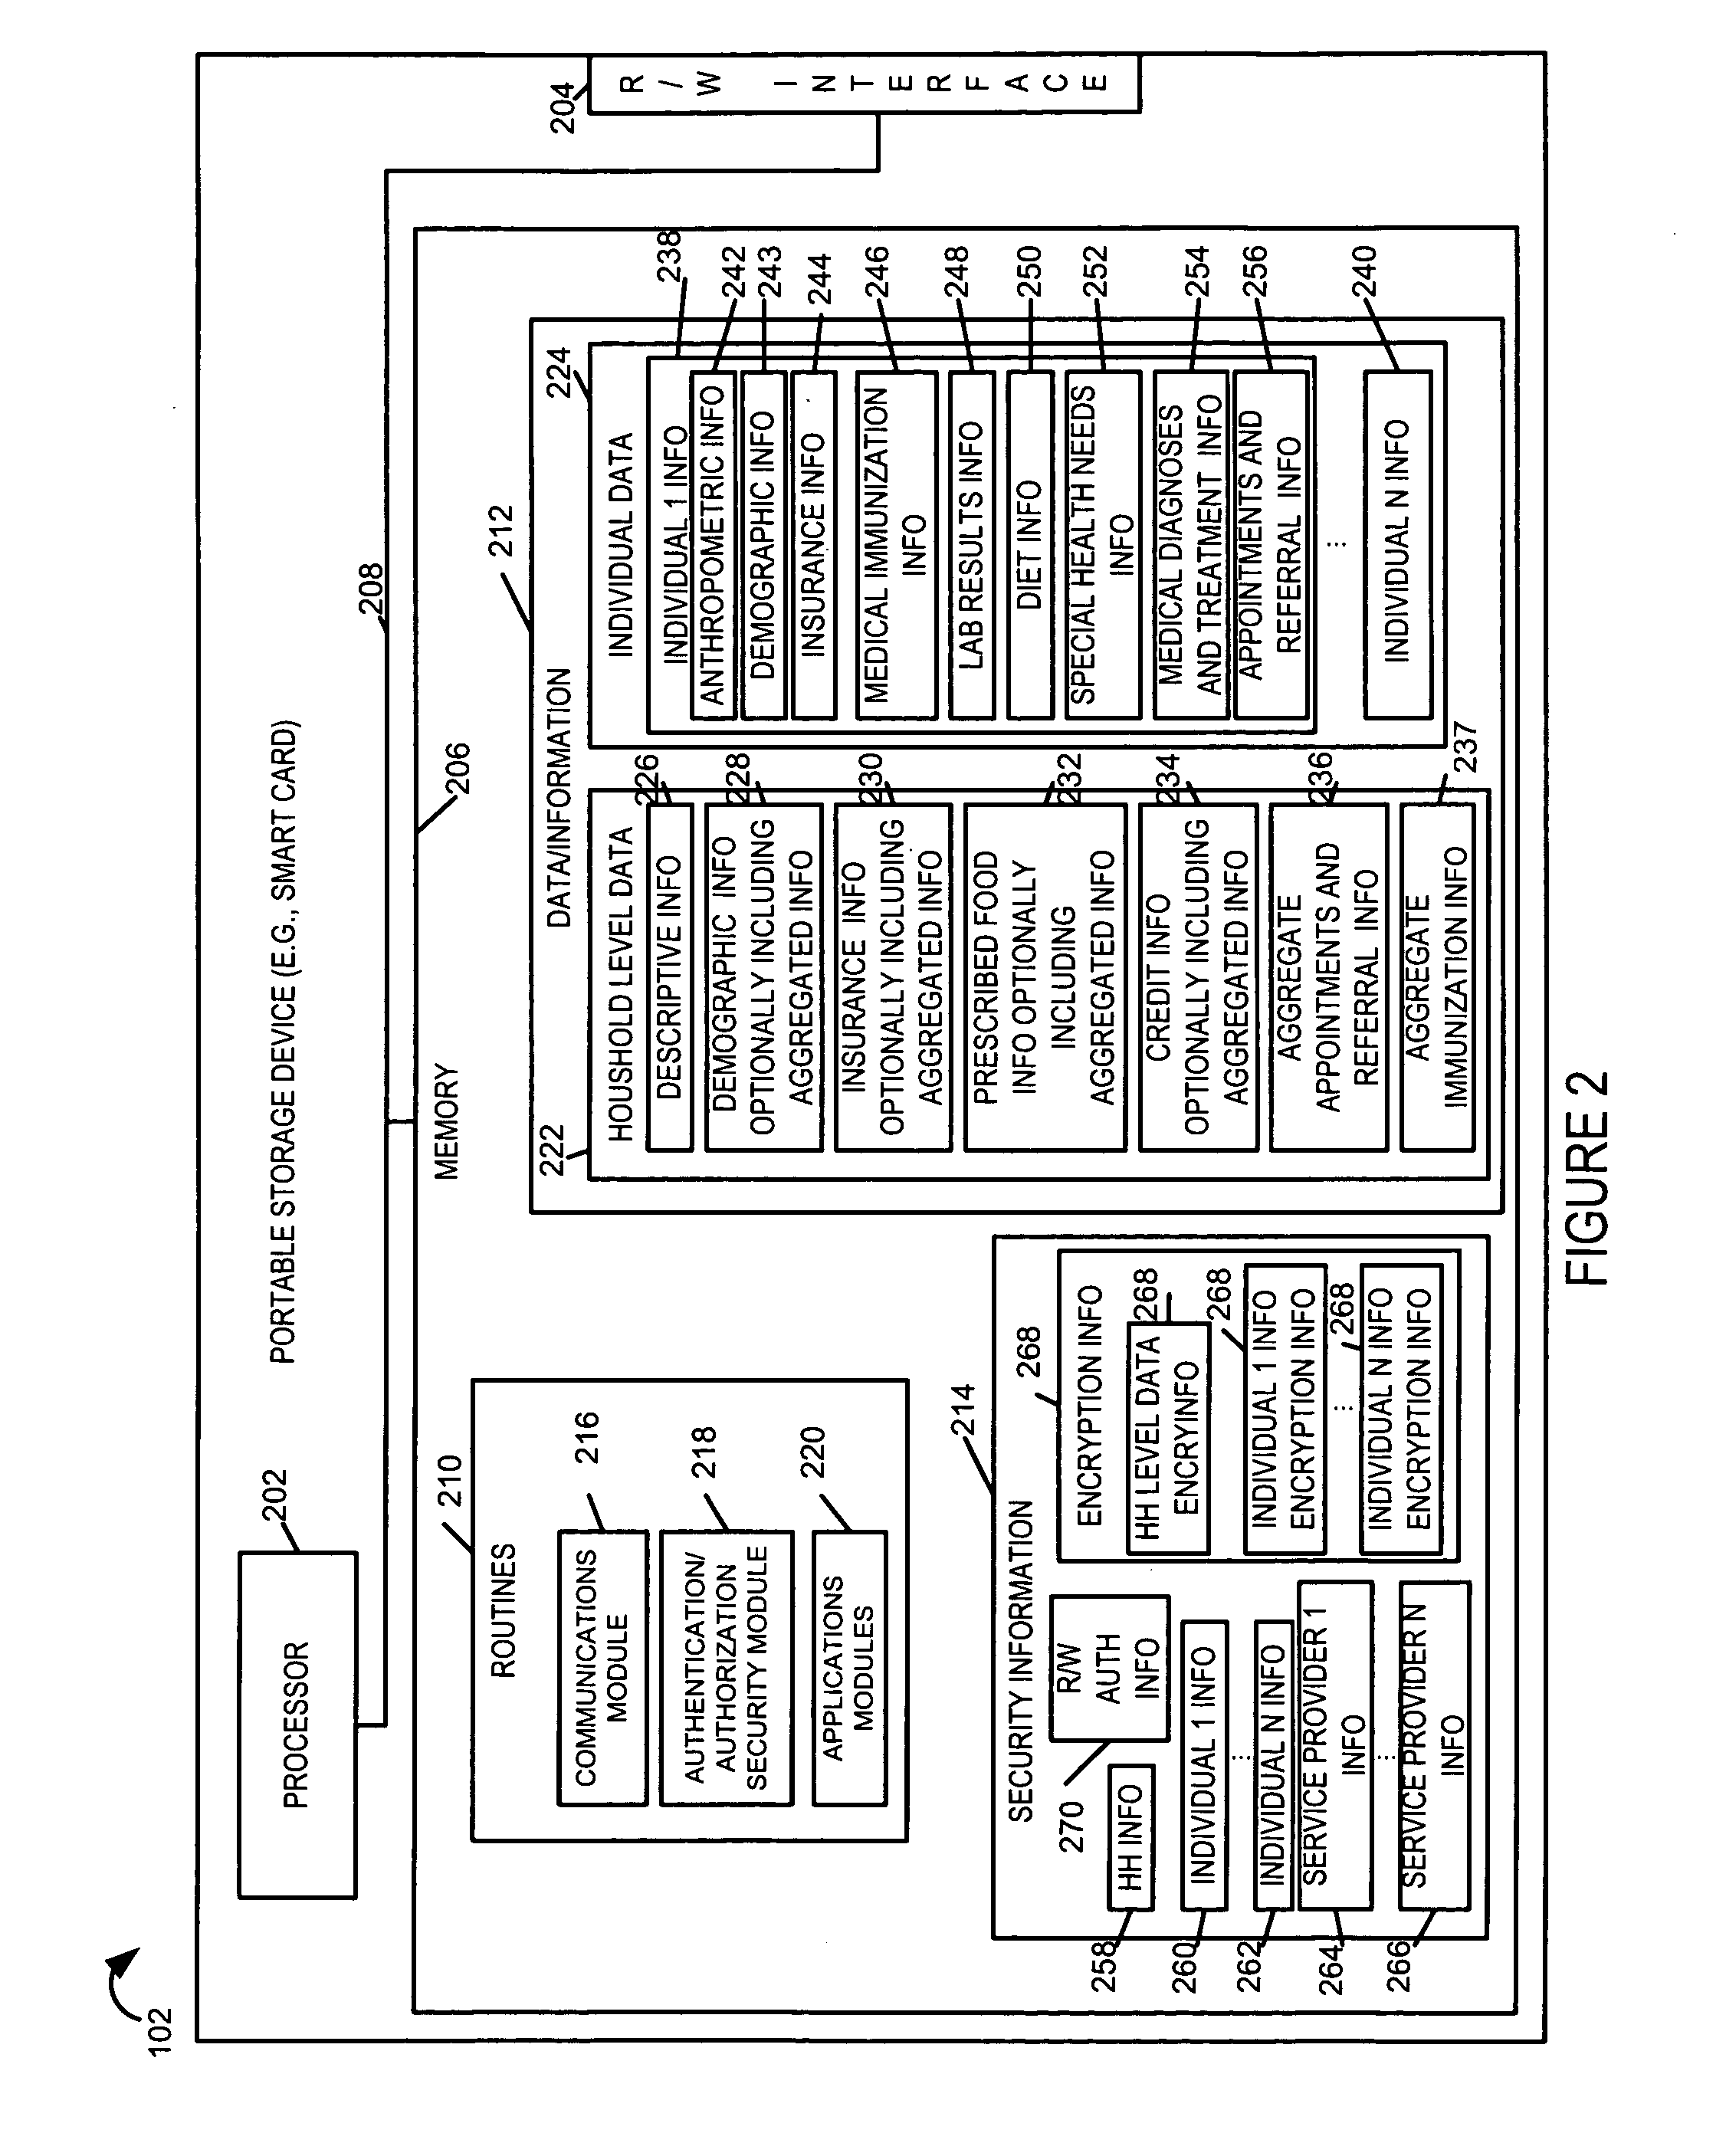 Portable electronic data storage and retreival system for group data